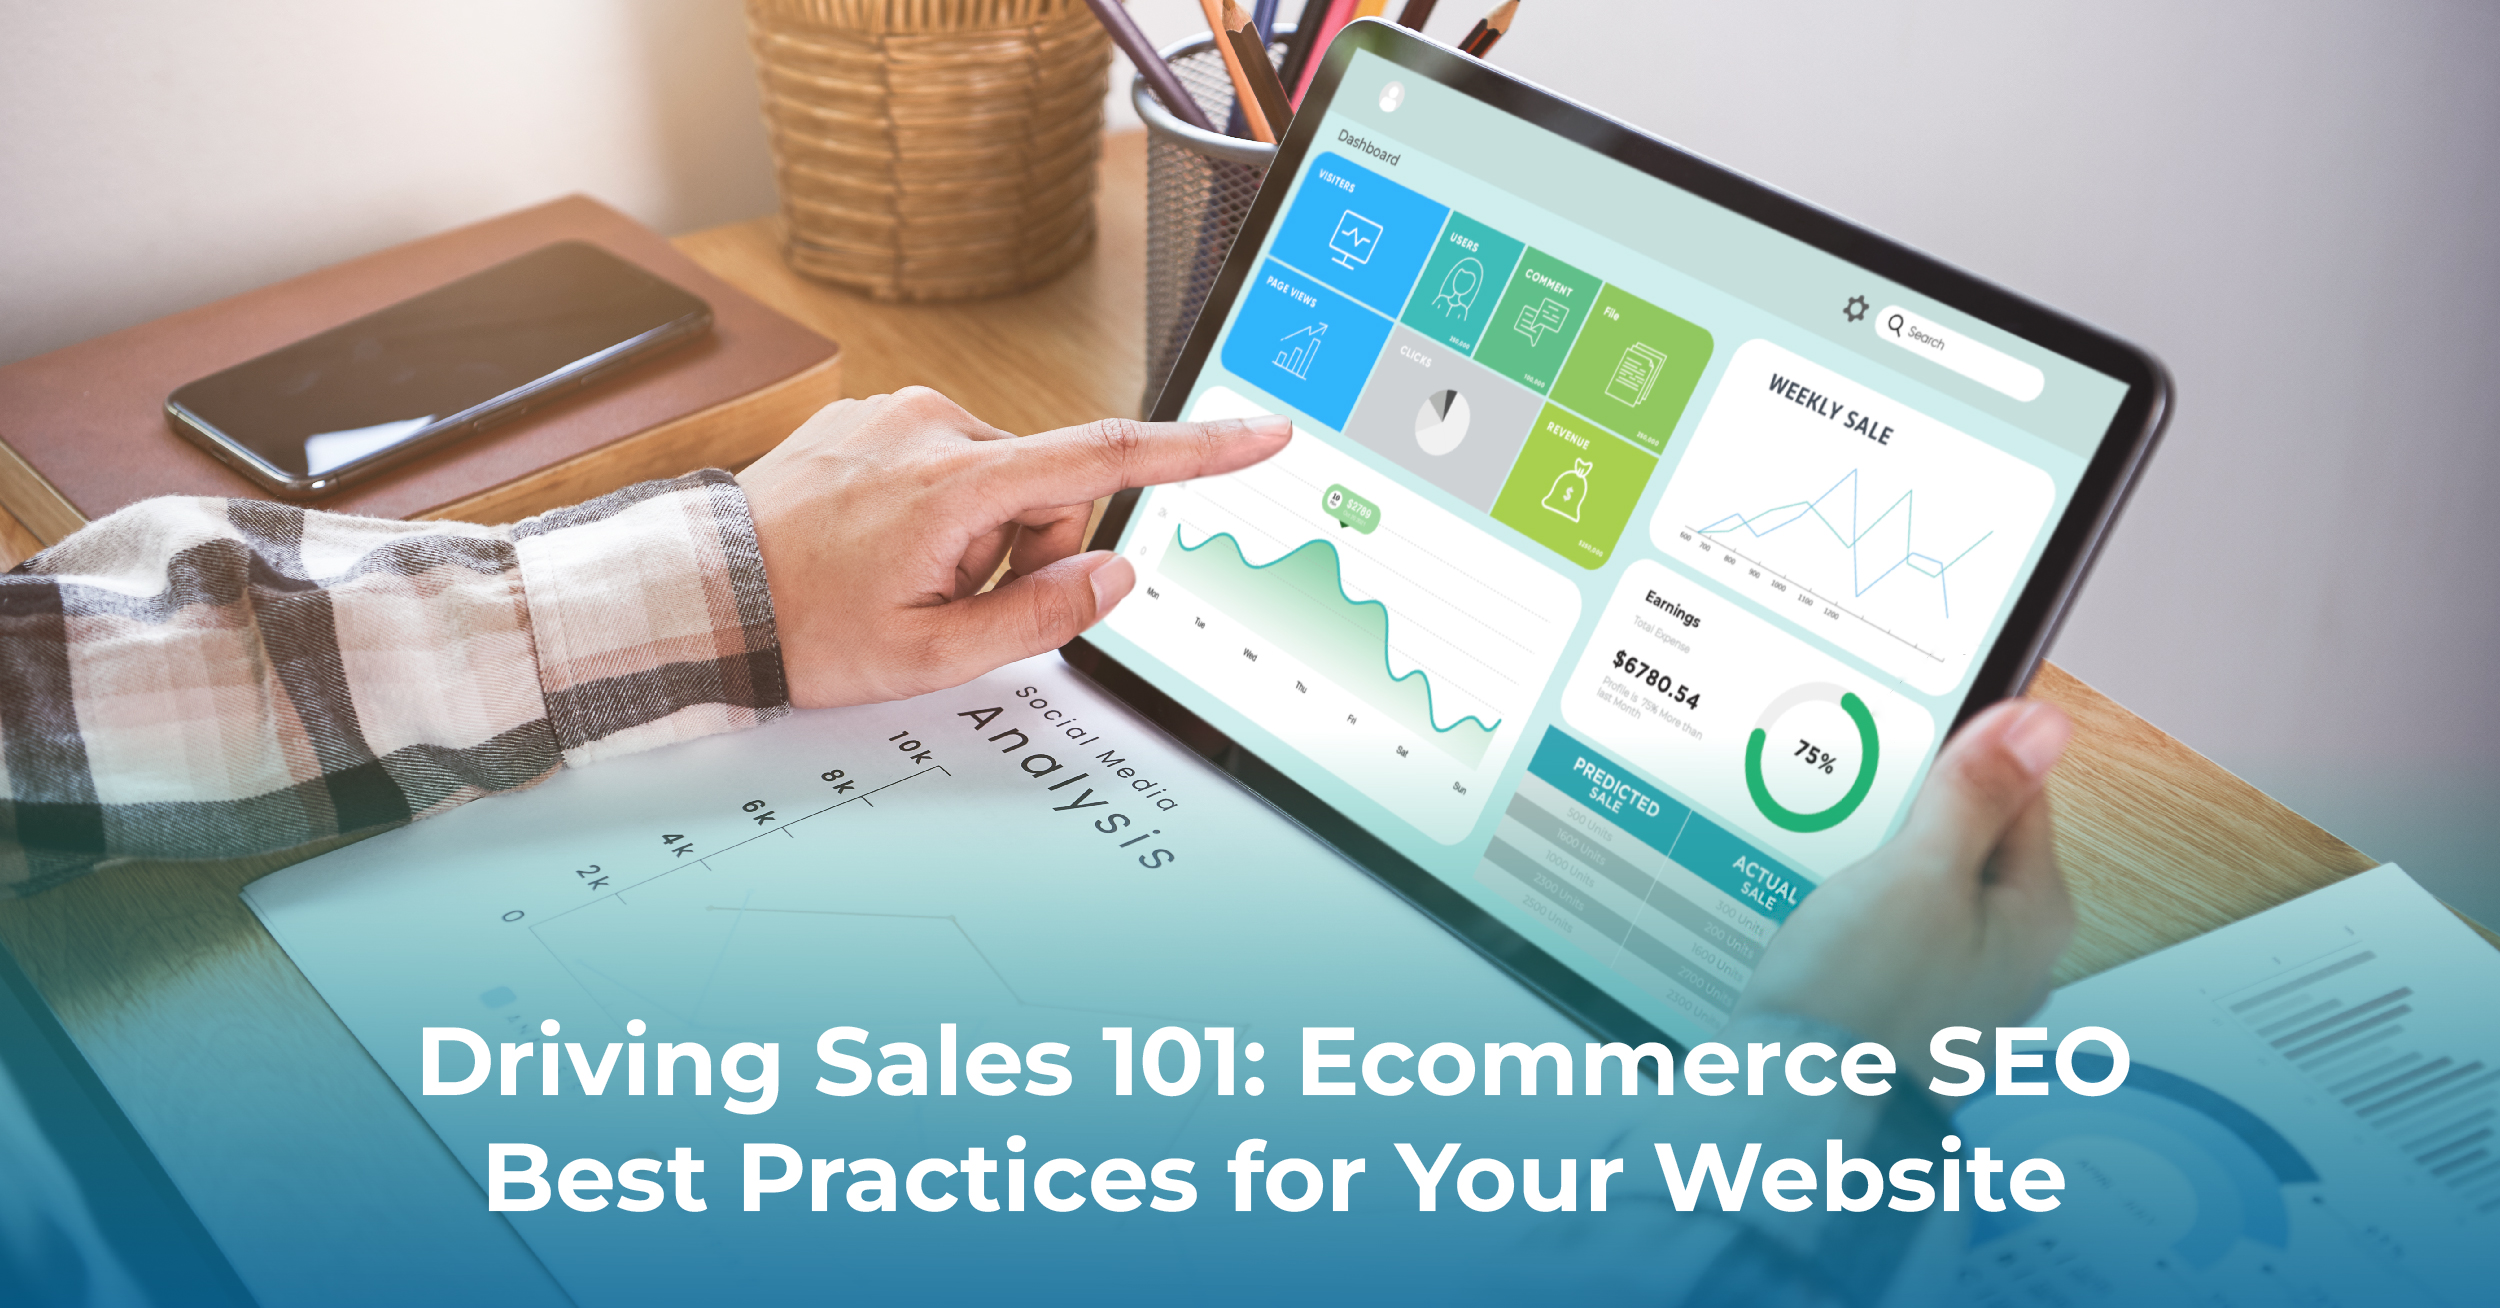 Driving Sales 101: Ecommerce SEO Best Practices for Your Website